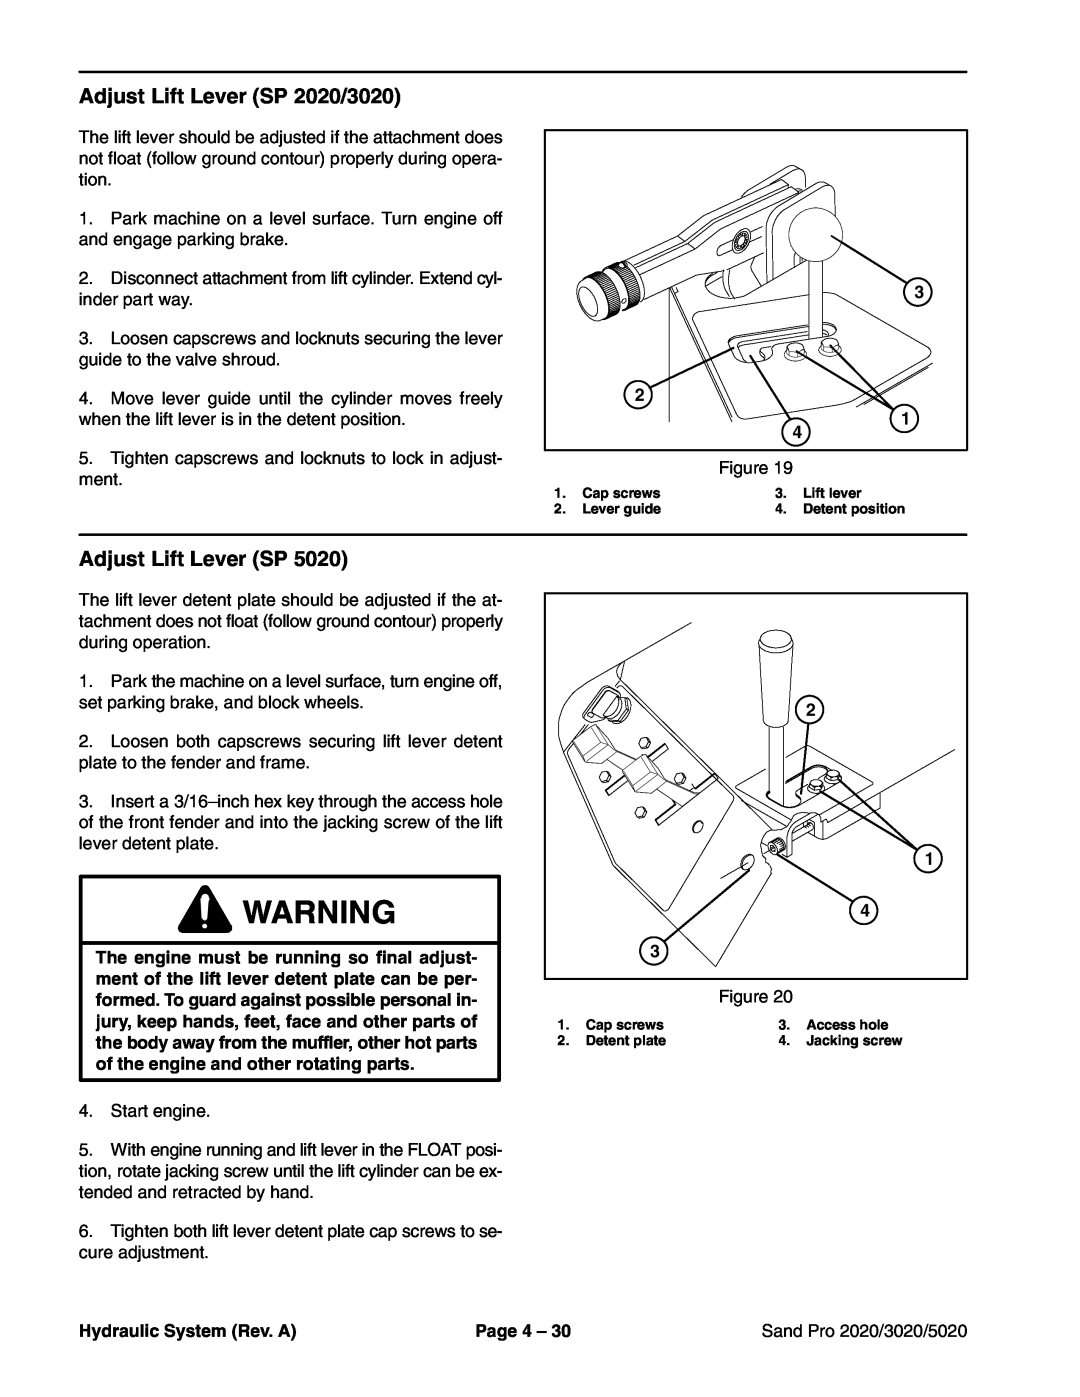 Toro service manual Adjust Lift Lever SP 2020/3020, Hydraulic System Rev. A, Page 4, Sand Pro 2020/3020/5020 